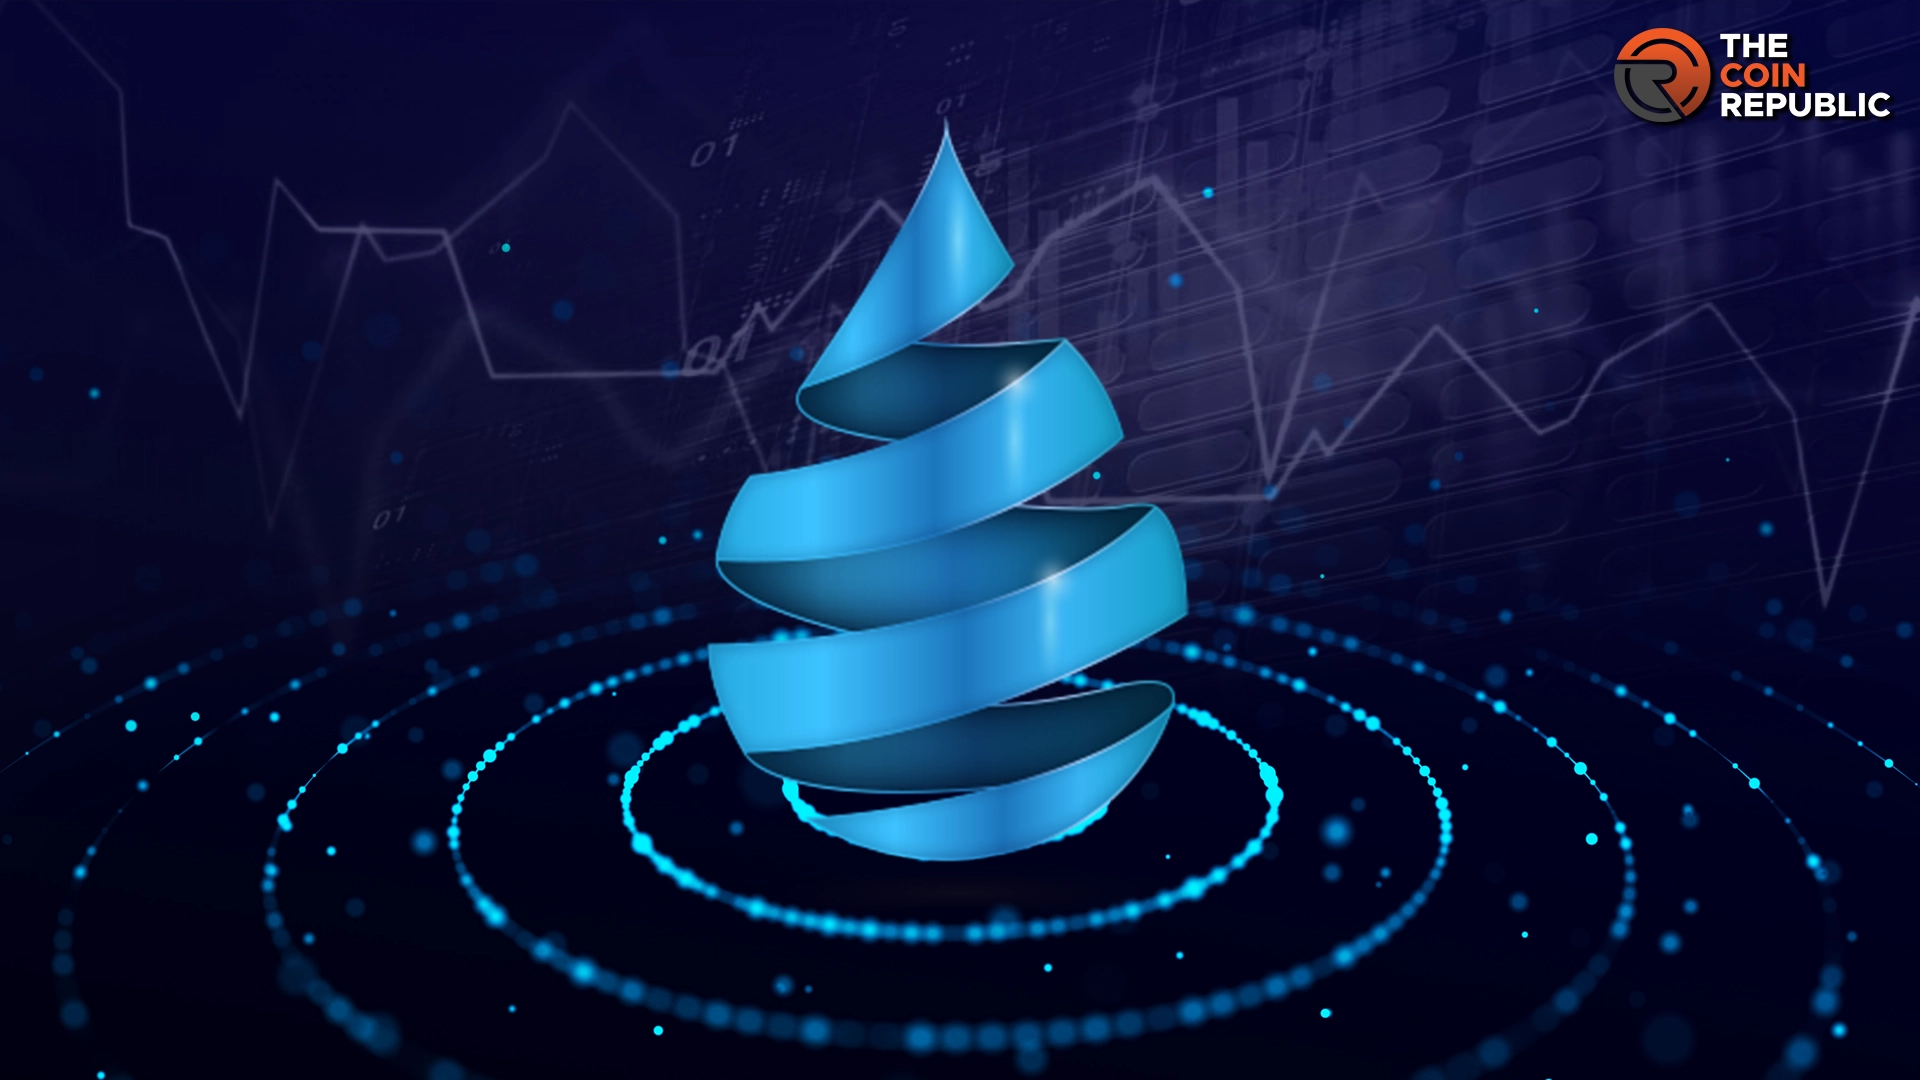 Drip Network Crypto Analysis: What’s Next in the DRIP Price?